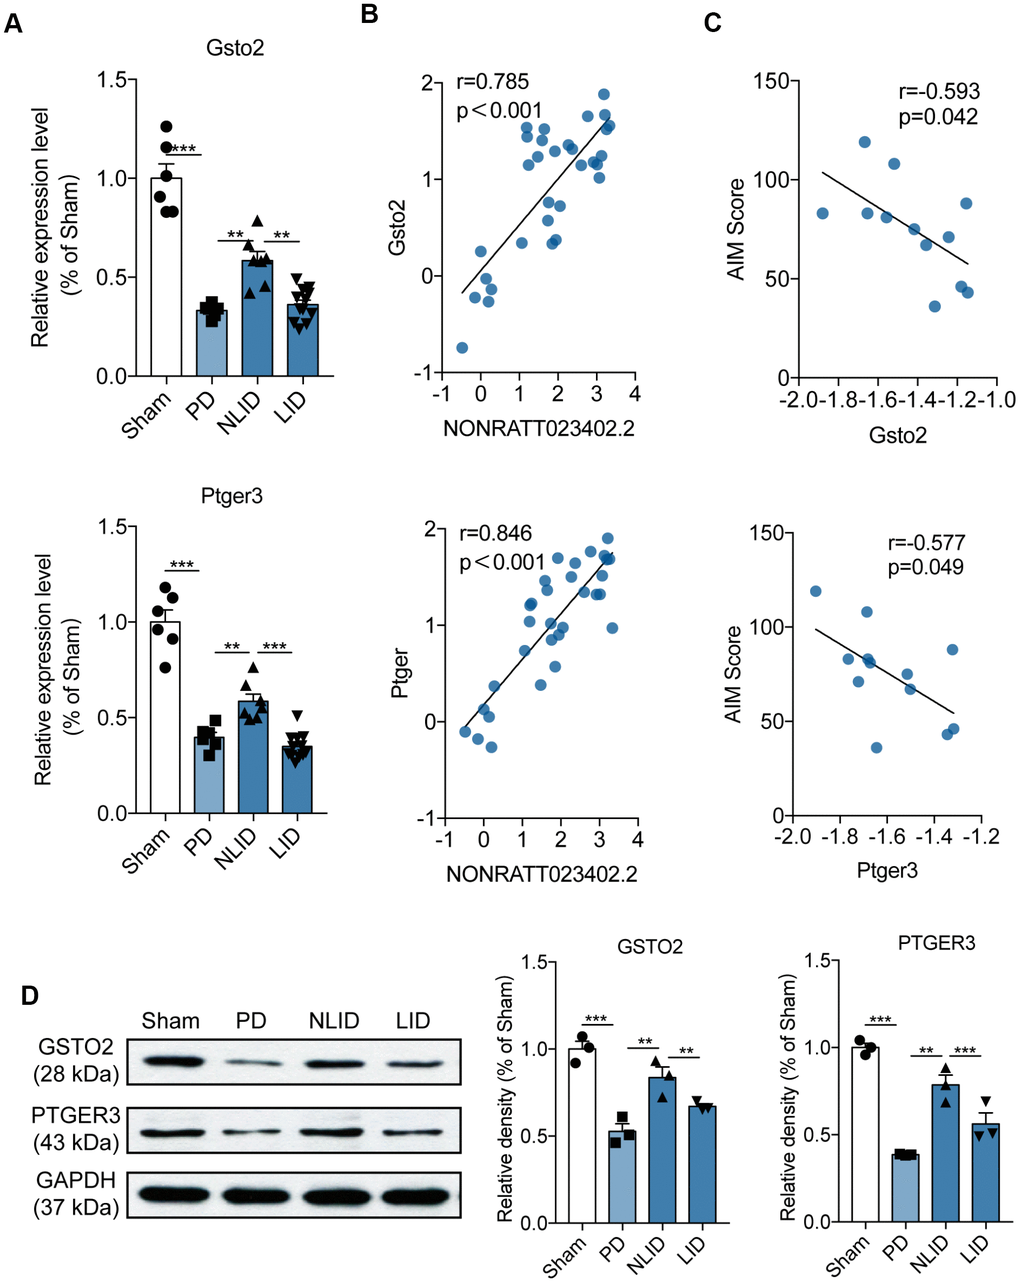 Expression profiles of the potential target genes of lncRNA NONRATT023402.2. (A) Gsto2 and Ptger3 expression determined by qRT-PCR in the striatum of PD and LID rats and their corresponding controls (n = 6–11). (B) Correlation between NONRATT023402.2 and Gsto2 or Ptger3 expression levels in the striatum of PD and LID rats and their corresponding controls (n = 11).  (C) Correlation between Gsto2 or Ptger3 expression in the striatum of LID rats and AIM score (n = 11). (D). GSTO2 and PTGER3 protein levels in the striatum of PD and LID rats and their corresponding controls (n = 3), as determined by western blotting. The intensity of protein bands was quantified by densitometry and normalized to that of GAPDH. The same GAPDH image was used intentionally in Figure 1D and Figure 4D as the internal control of the same Western blot. Data represent mean ± SEM. **P 